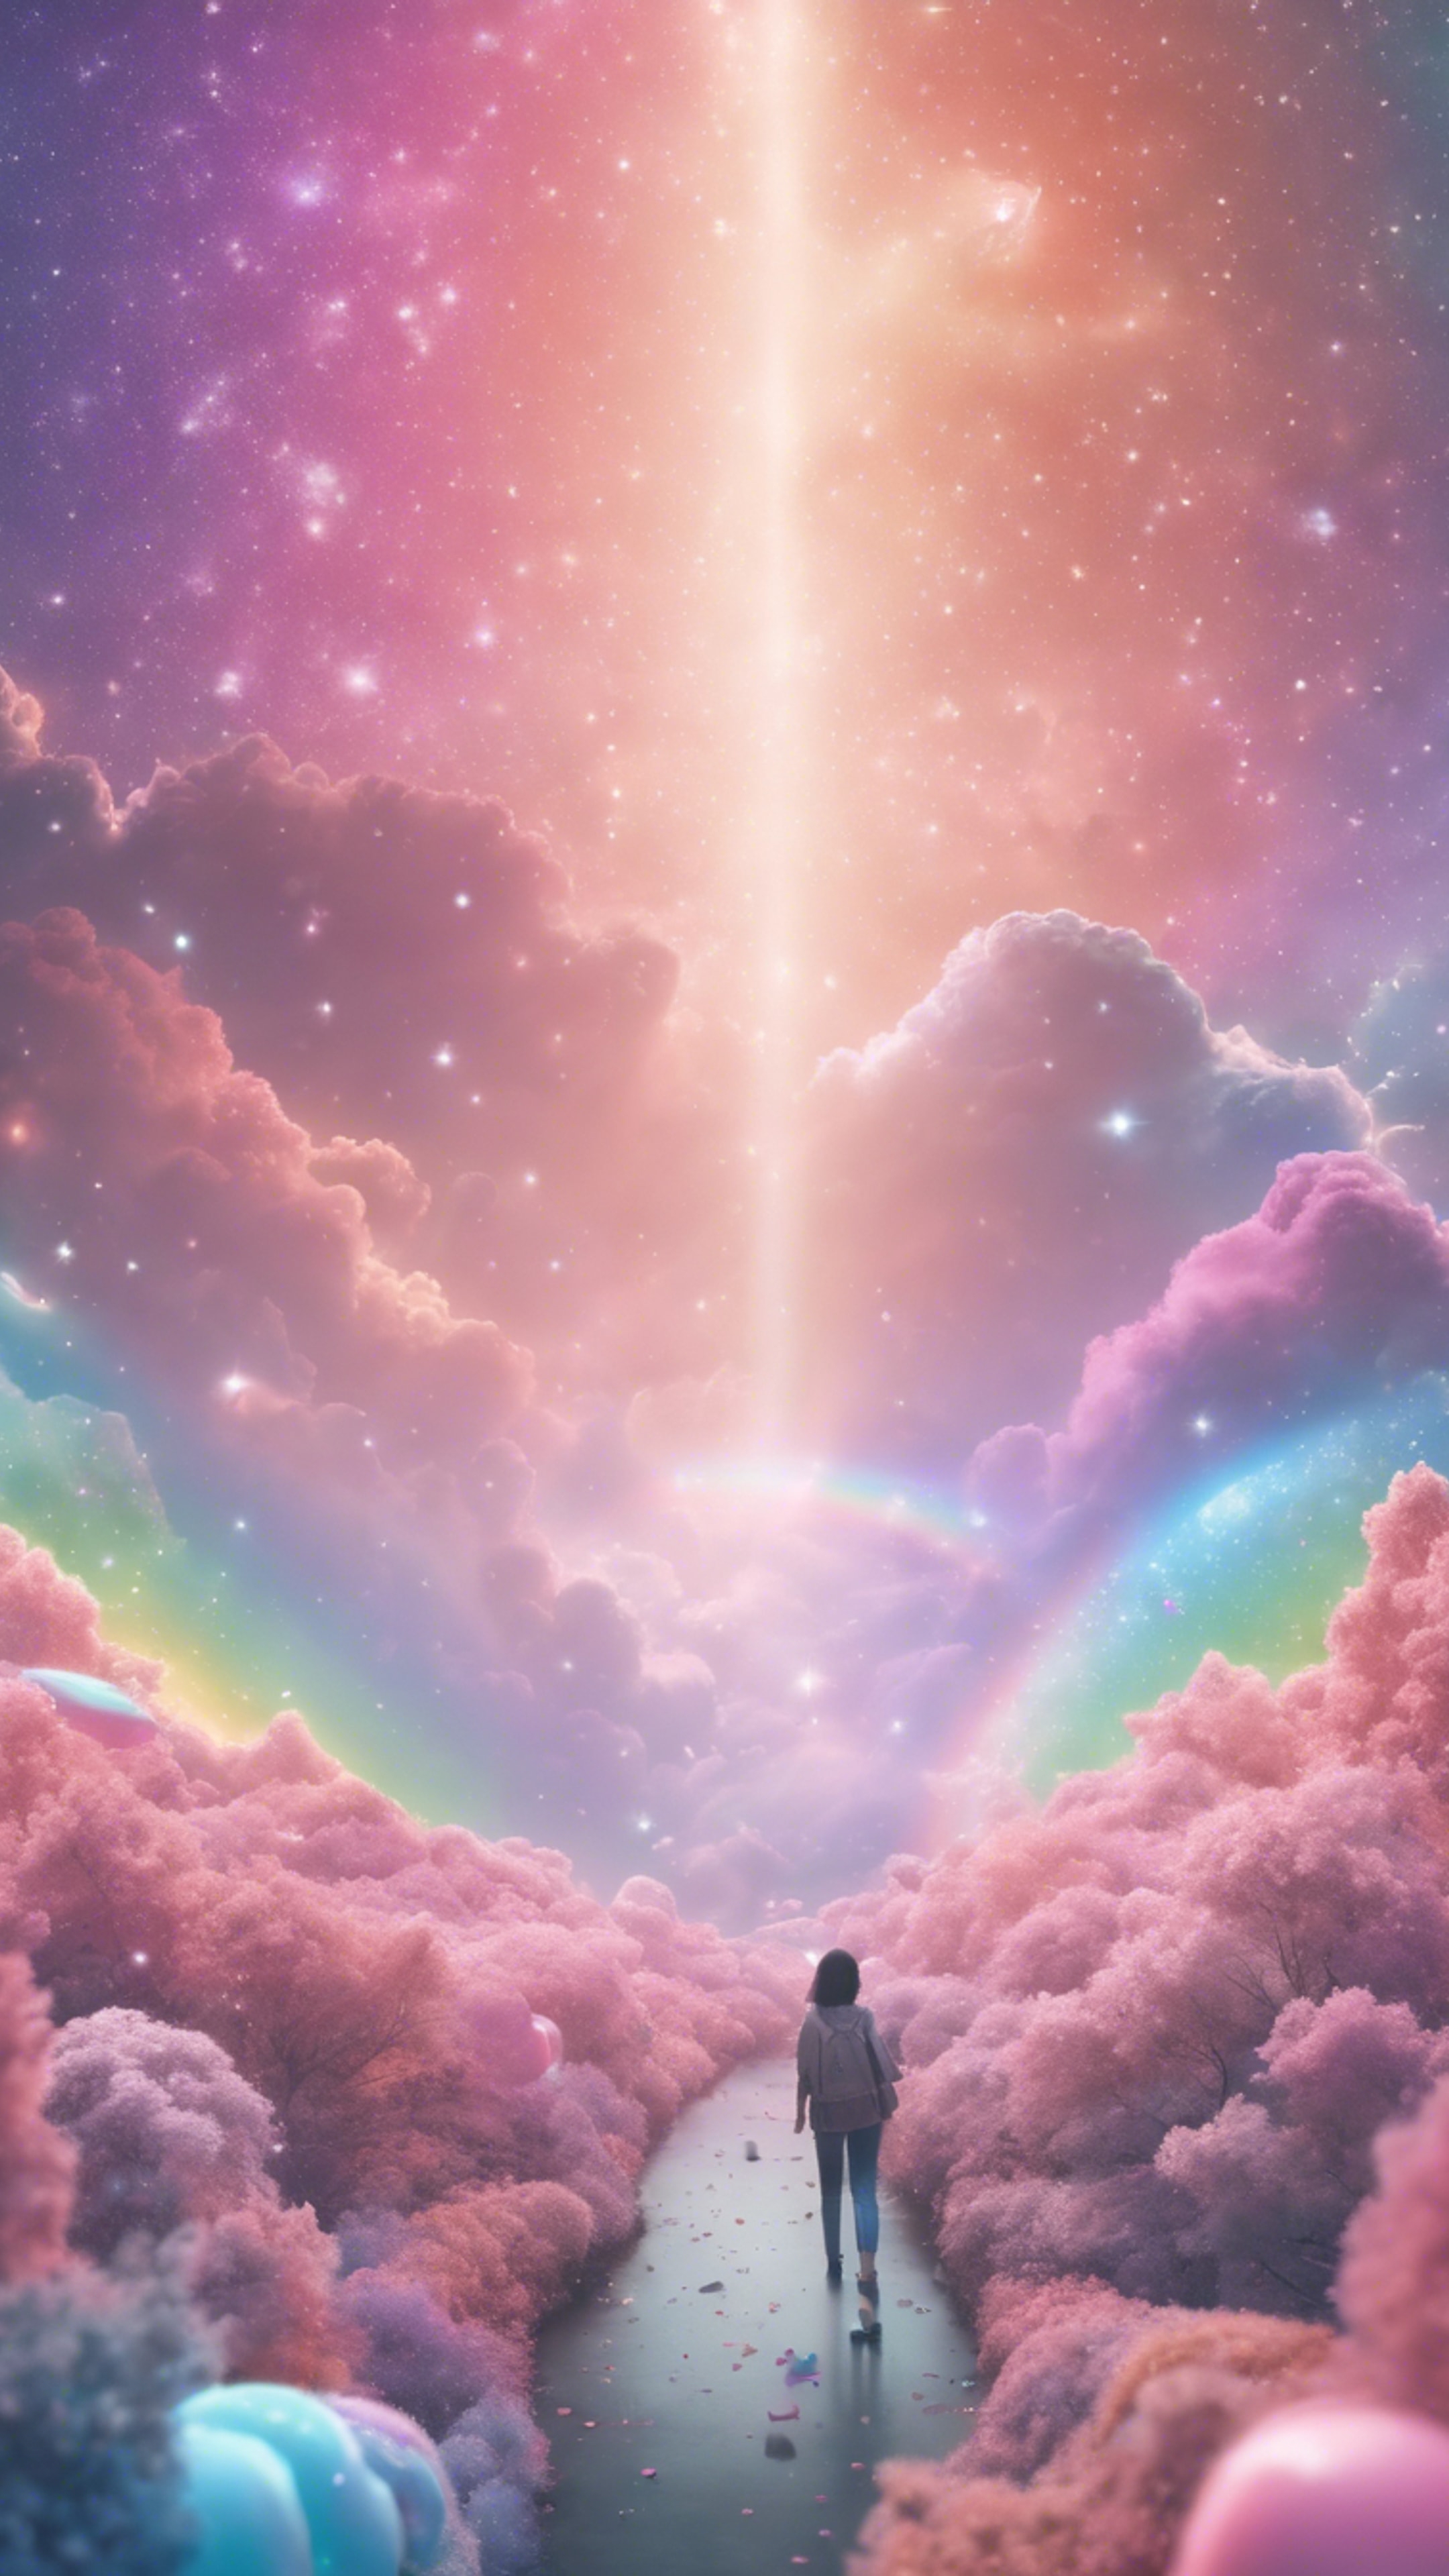 A kawaii-style galaxy filled with a rainbow of soft pastel colors. Валлпапер[6d1c35a1081c44bbb883]